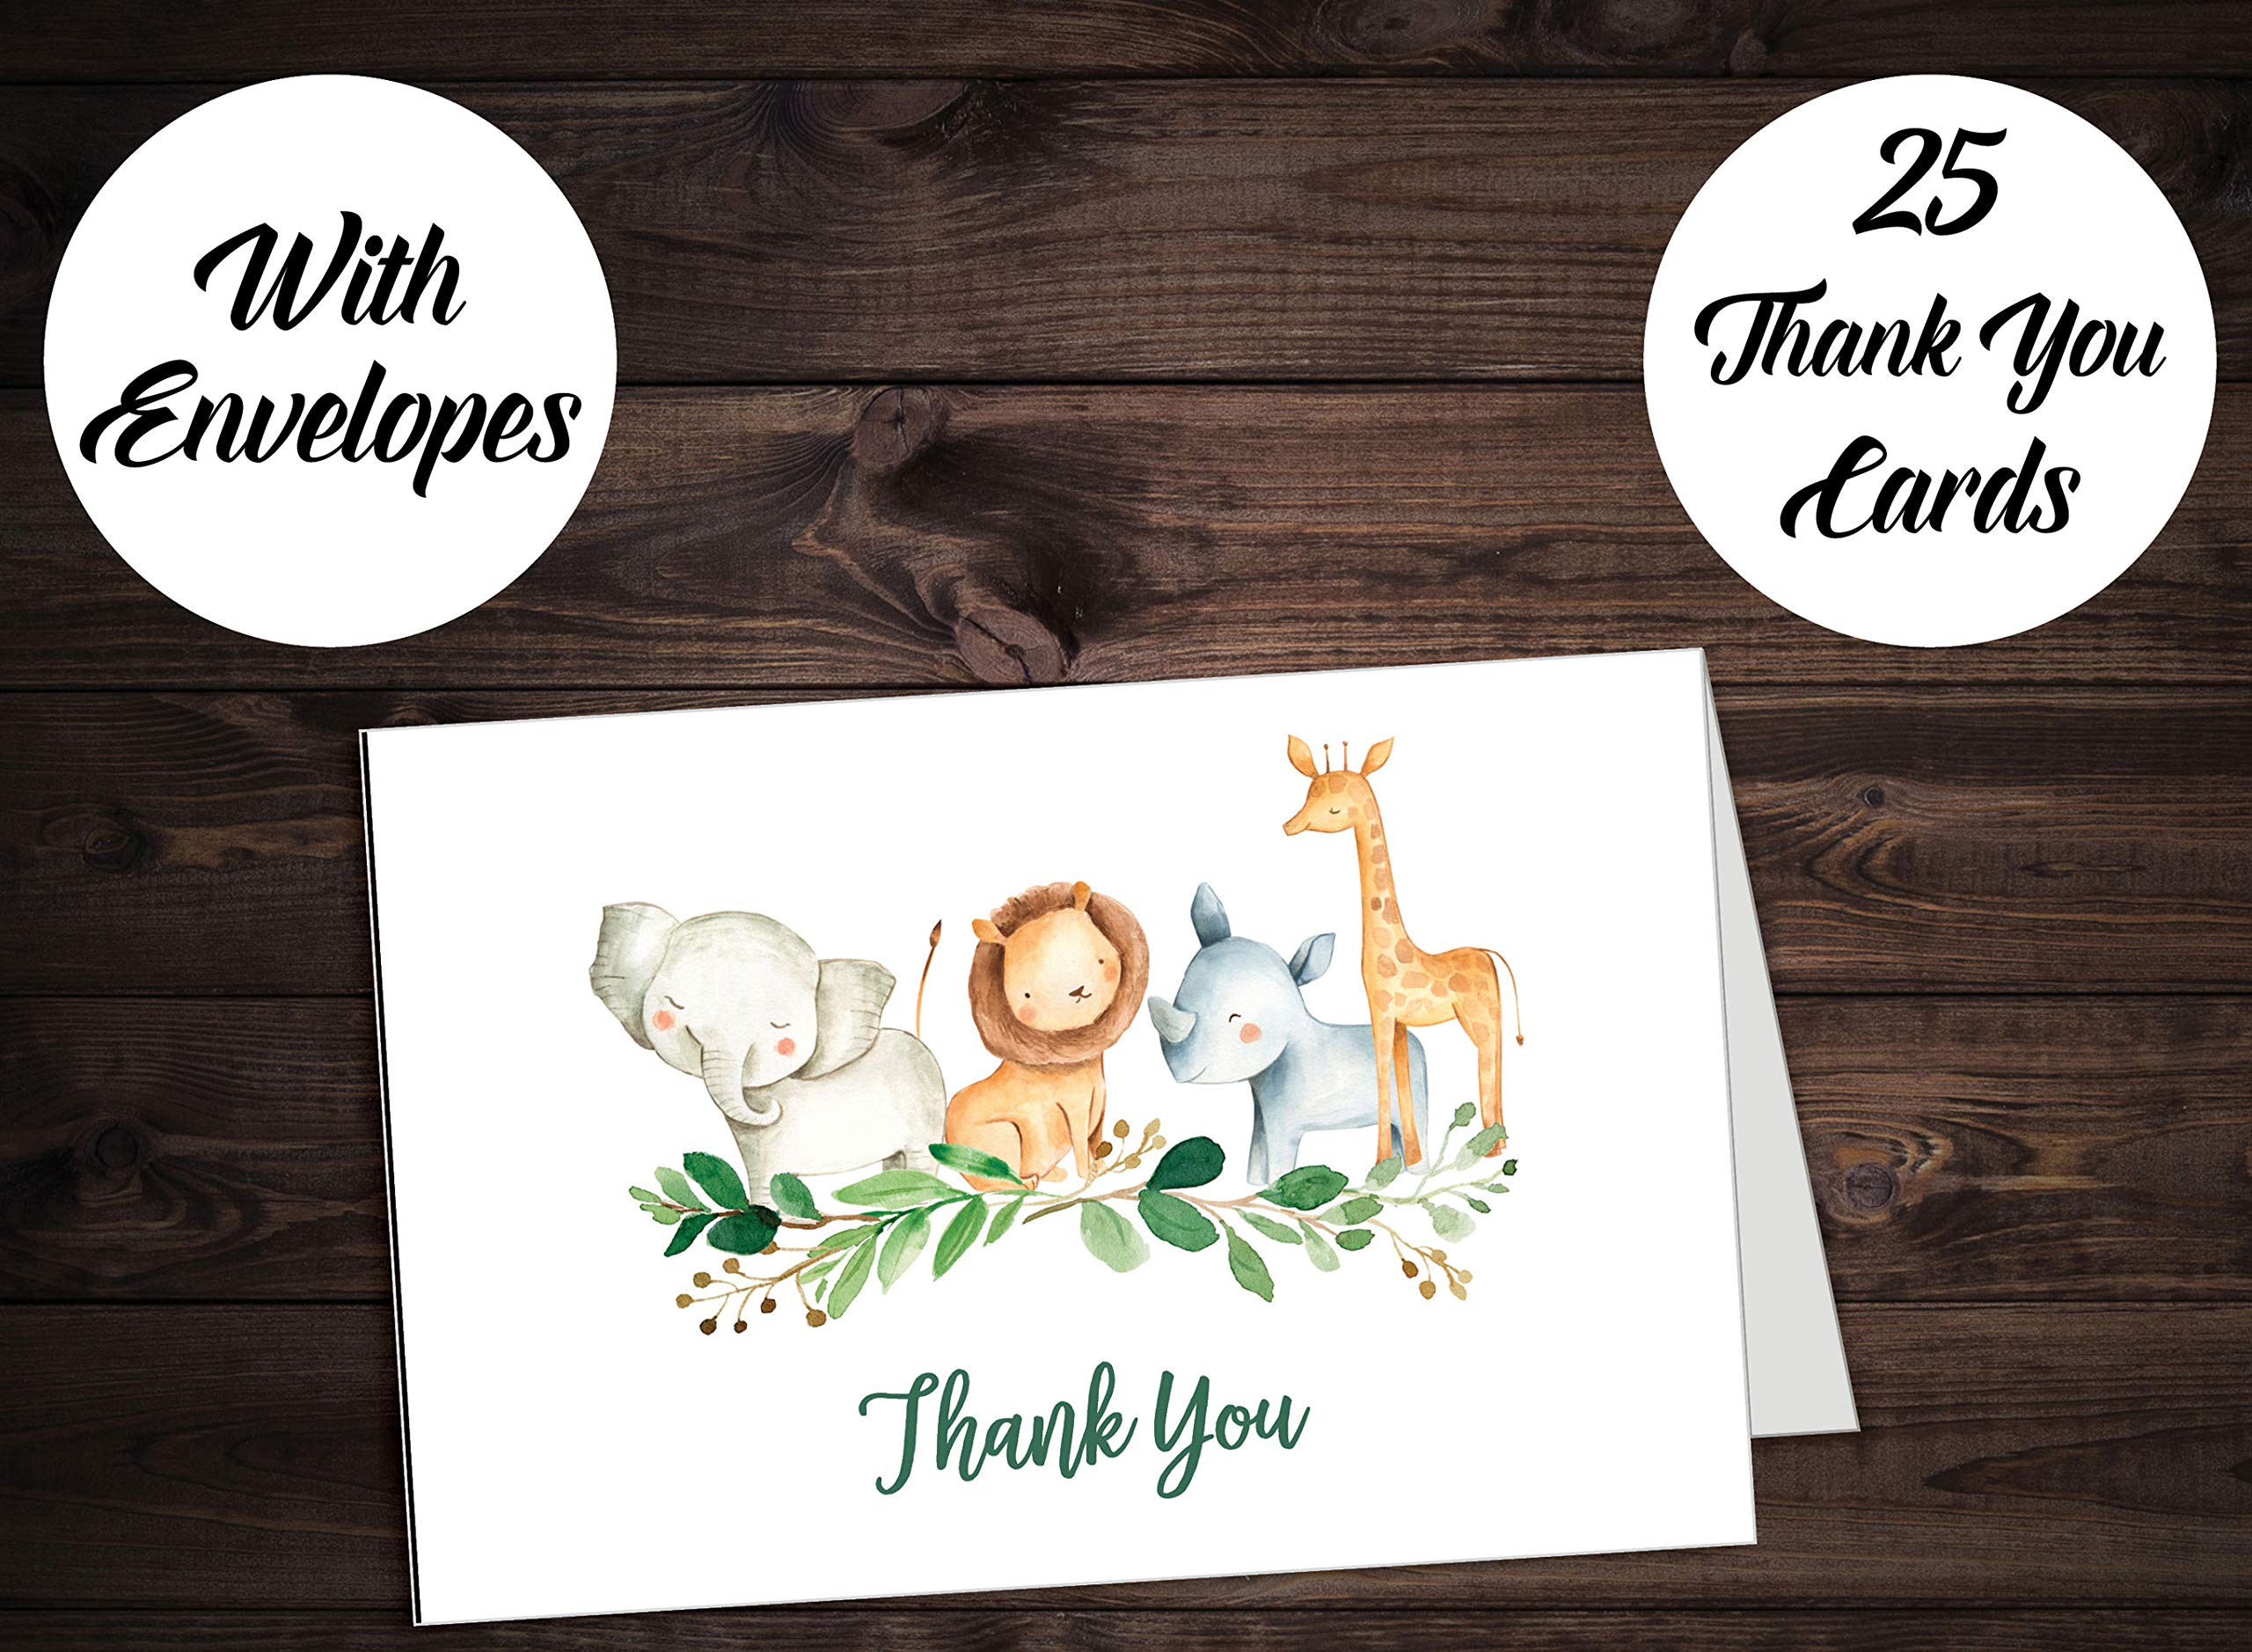 25 Boxed Safari Thank You Cards With Envelopes (Thick Card Stock) Baby Shower, Jungle Greenery Large Size 4x6 Zoo Animal Giraffe Lion Elephant Gratitude For Party, Girl Boy Children Birthday Stationery